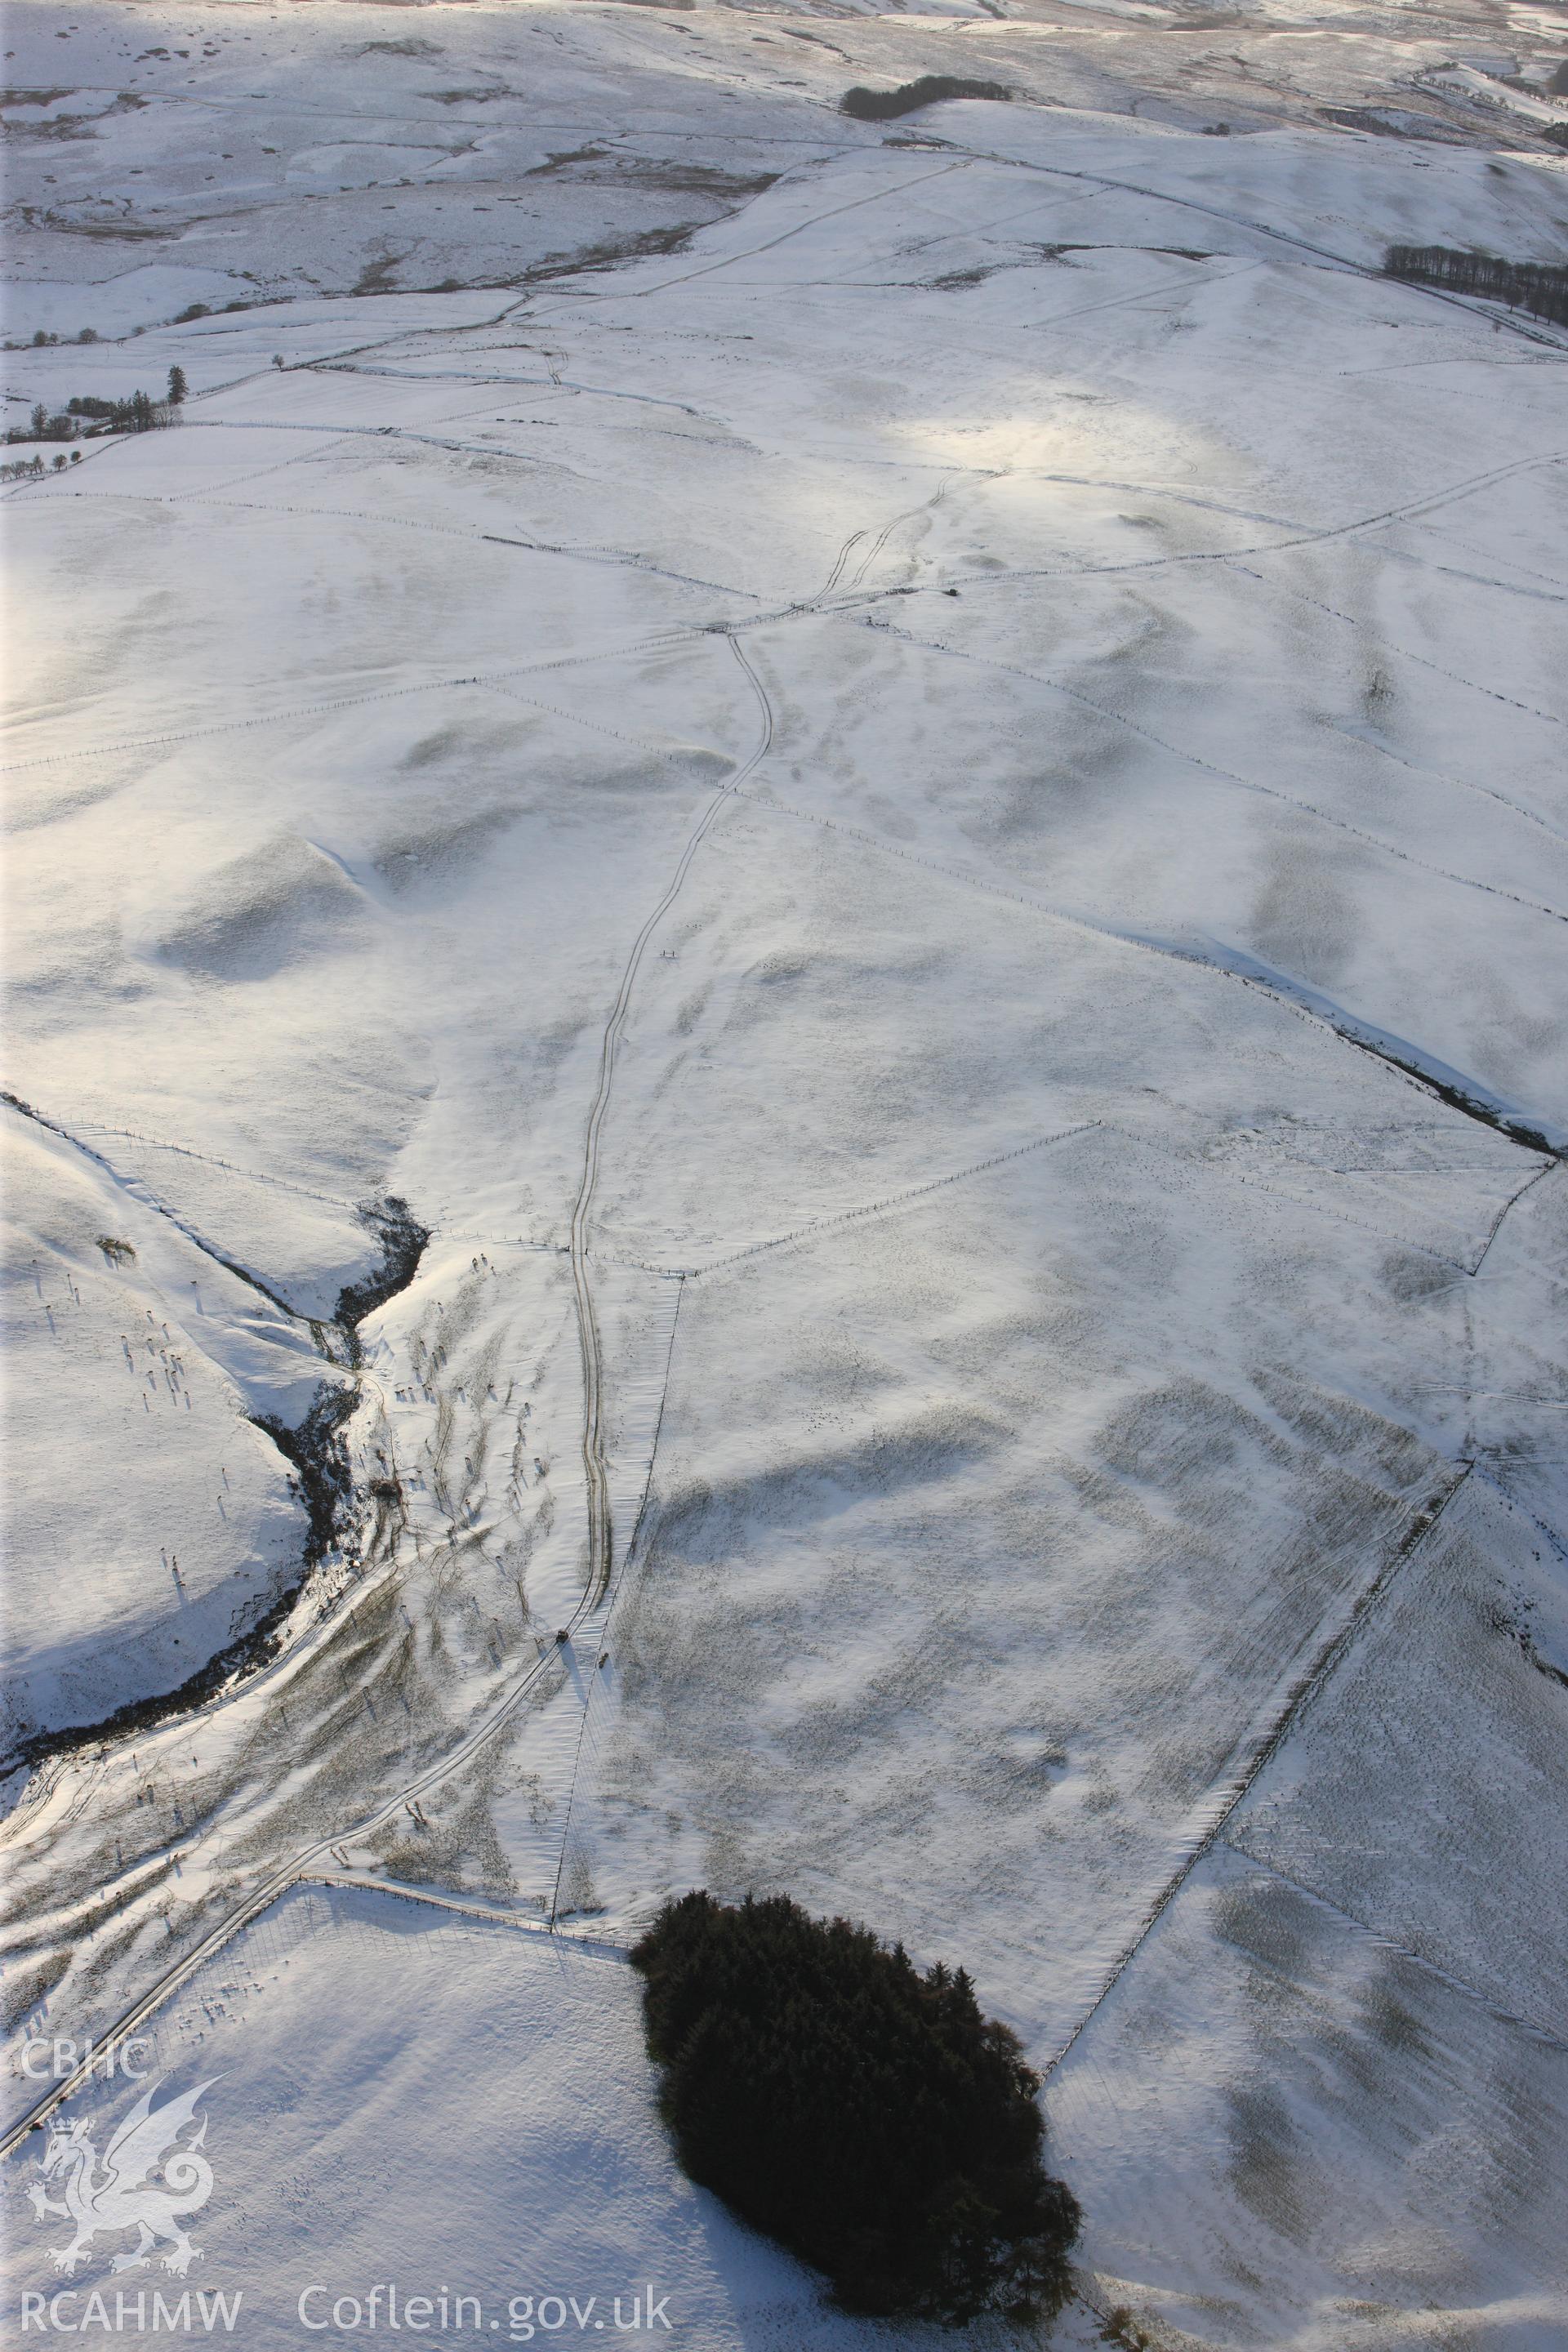 RCAHMW colour oblique photograph of Braided trackways, Kerry Hill, under snow. Taken by Toby Driver on 18/12/2011.